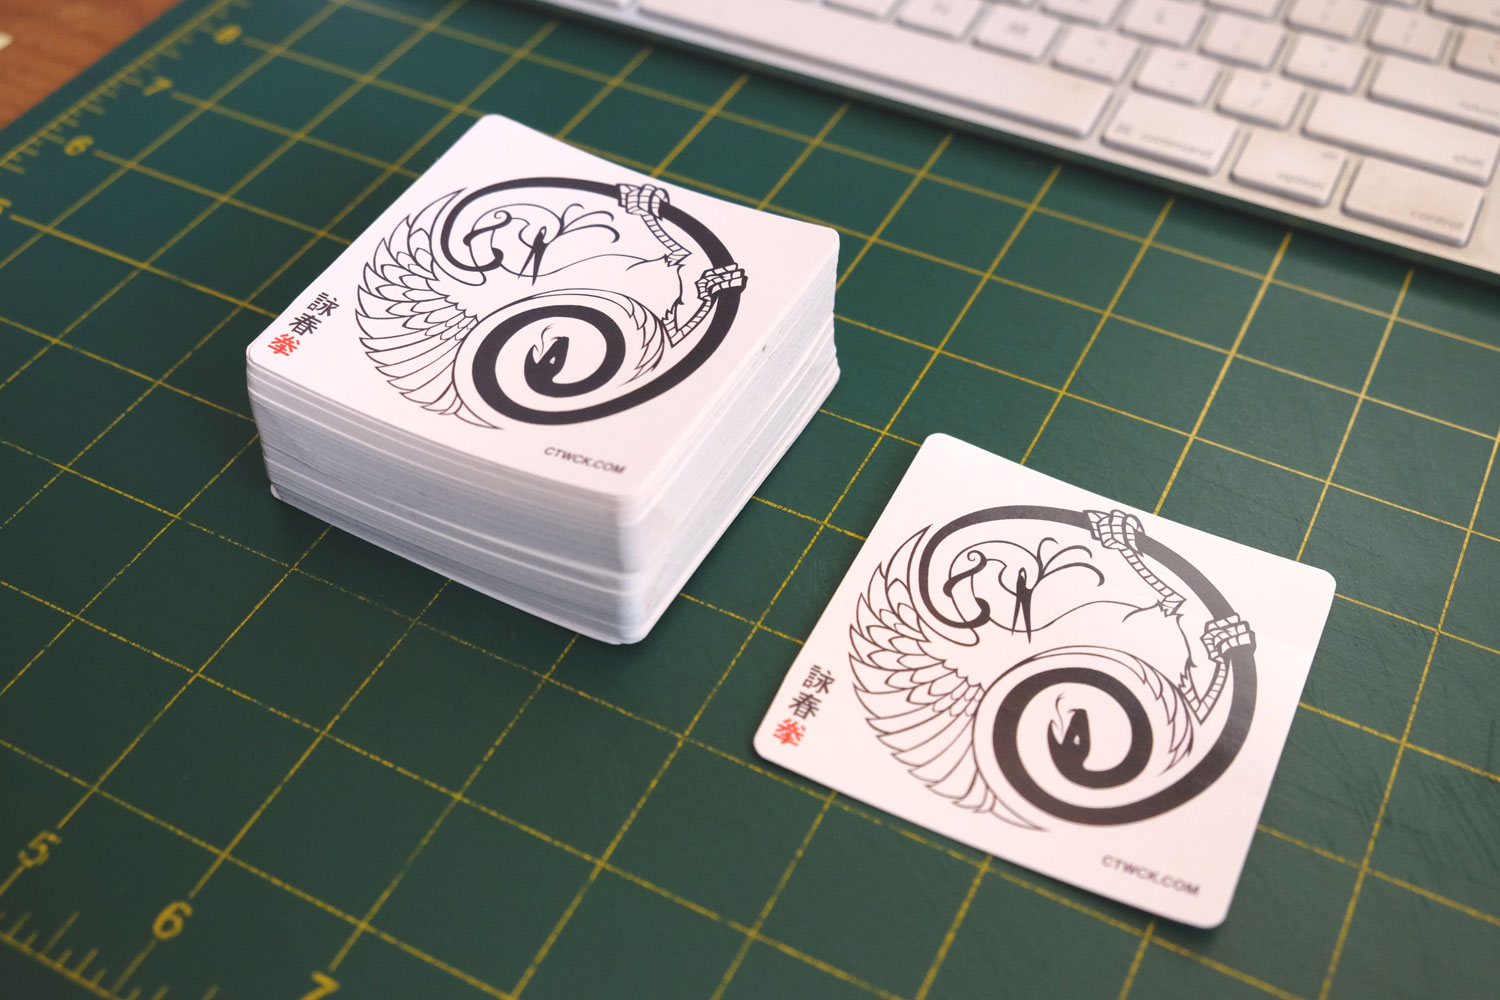 New Stickers Just Arrived.